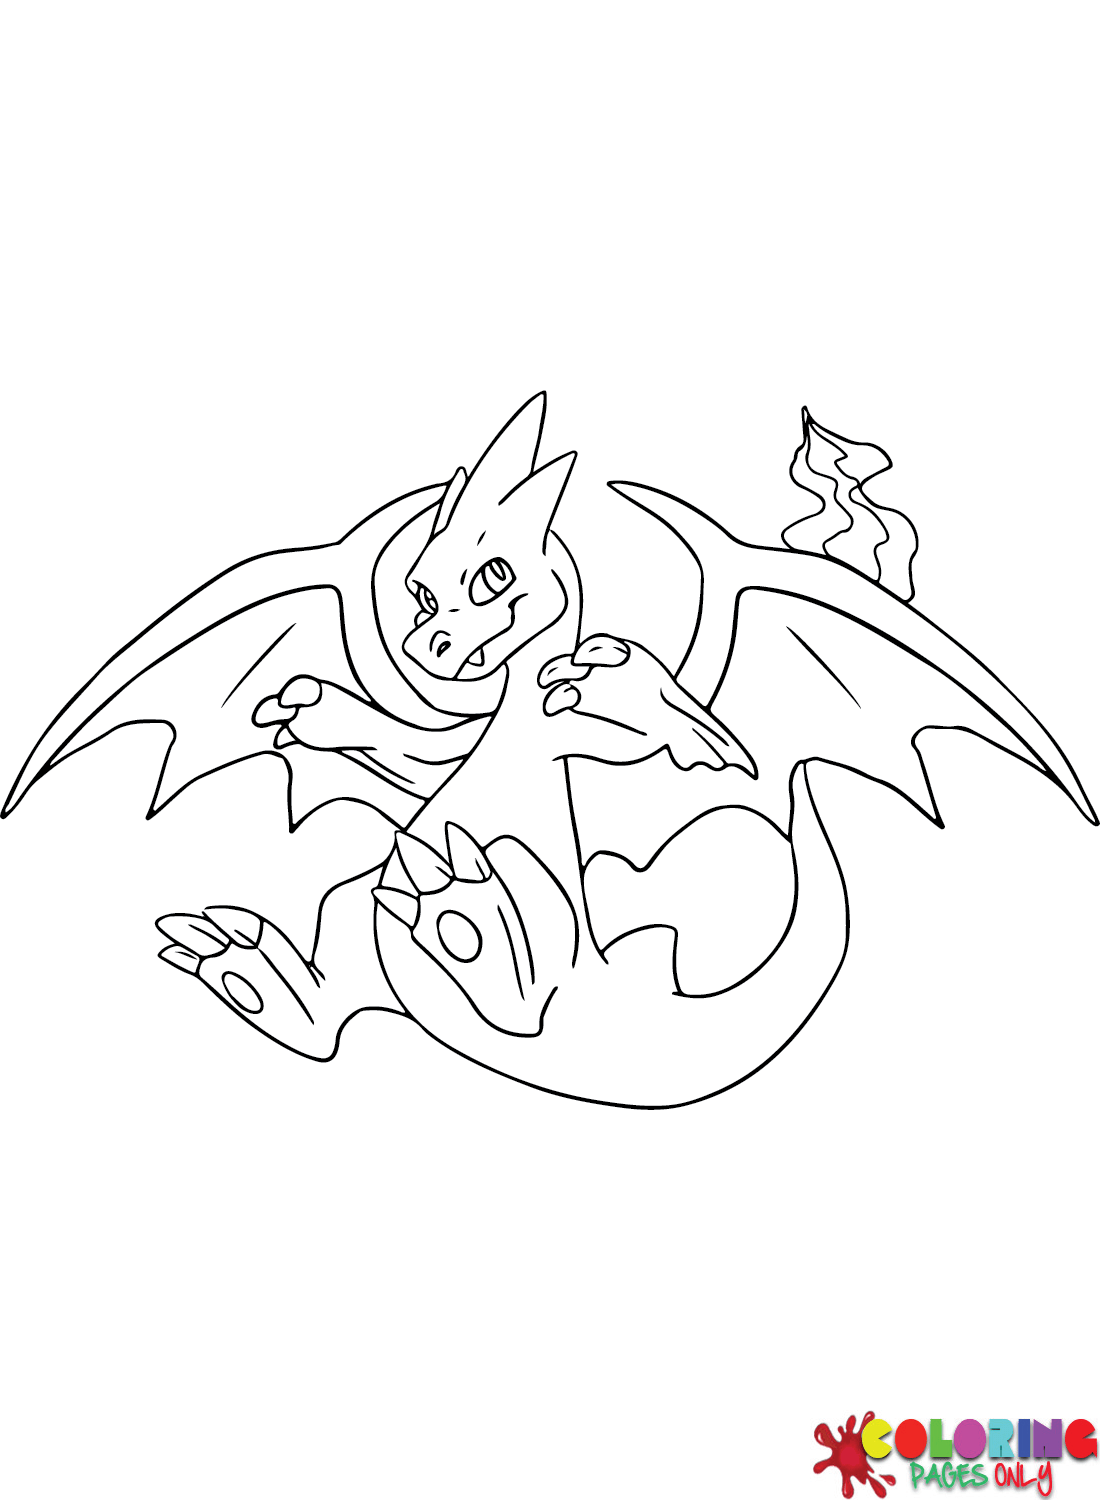 Charizard Character Coloring Pages